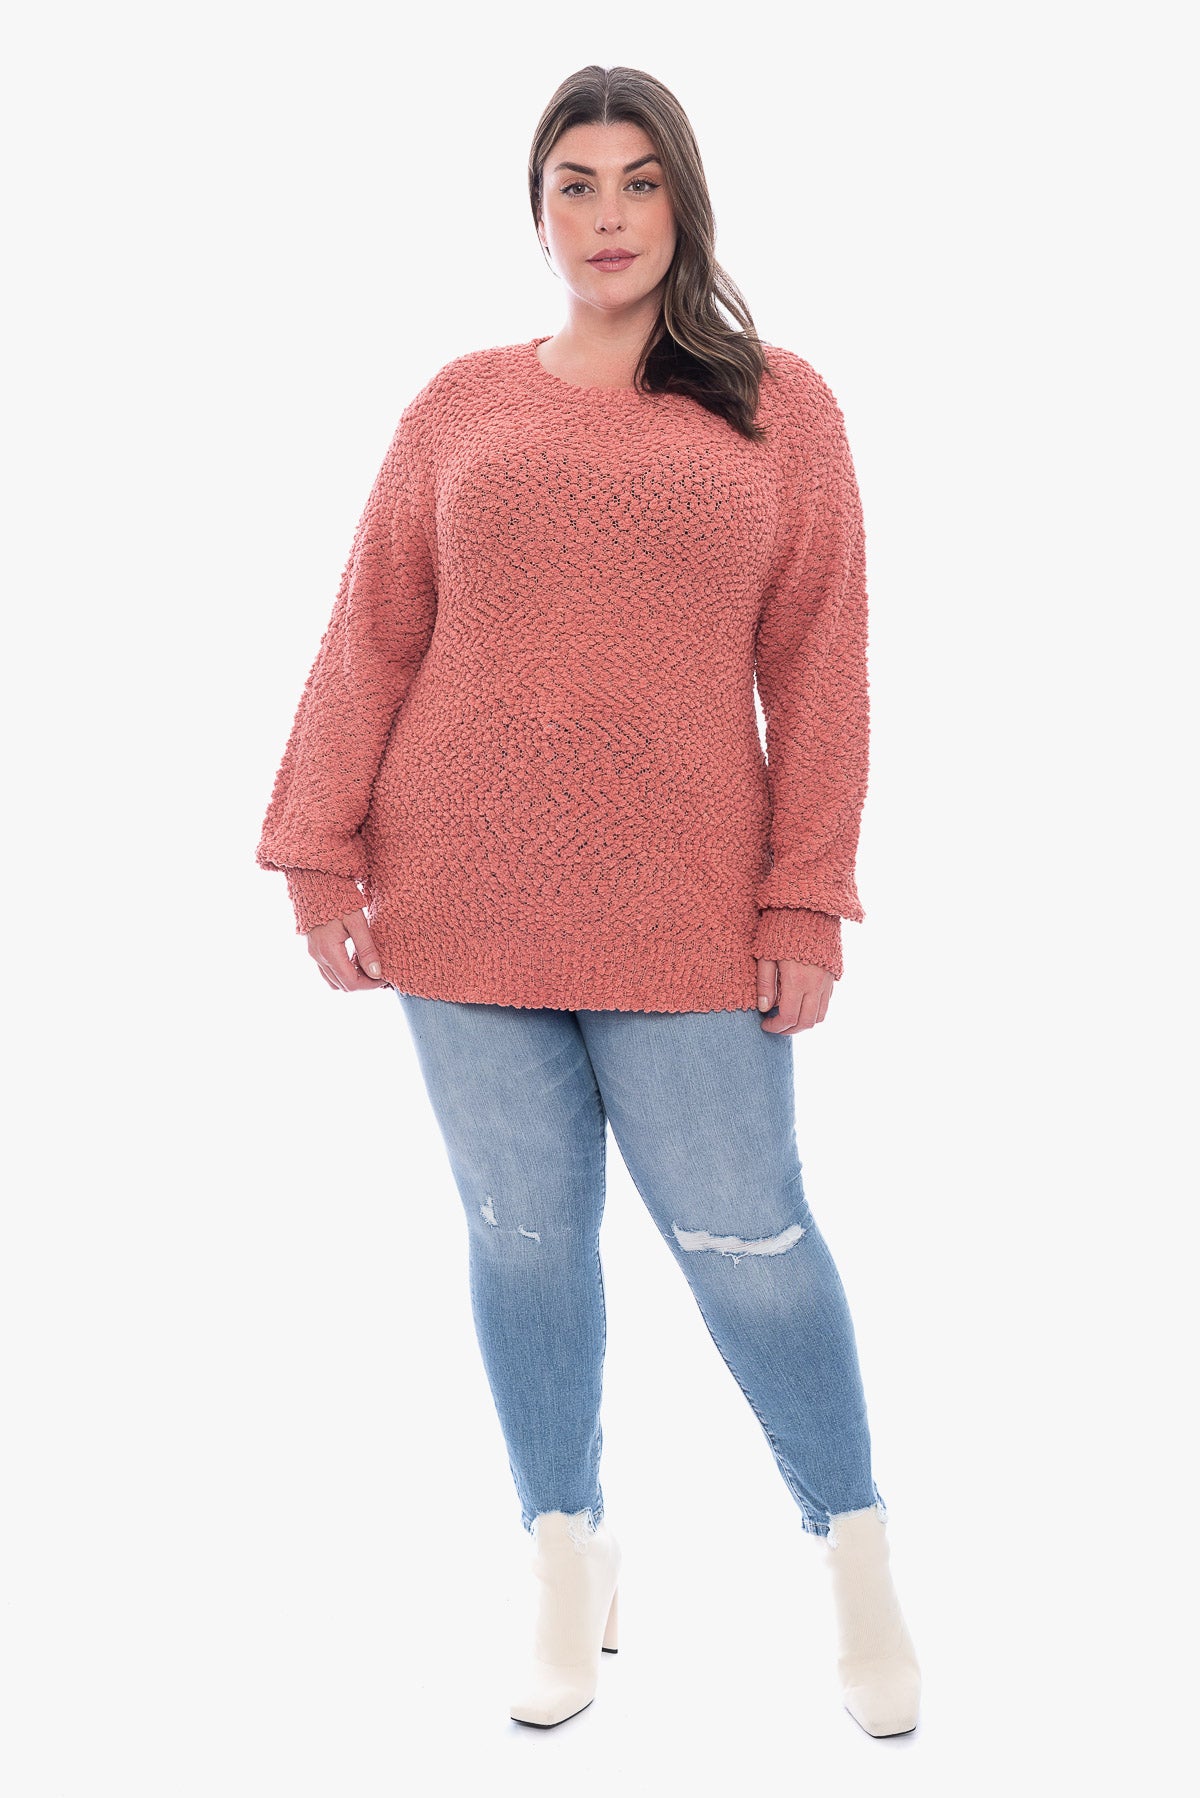 HARLOW popcorn knitted sweater